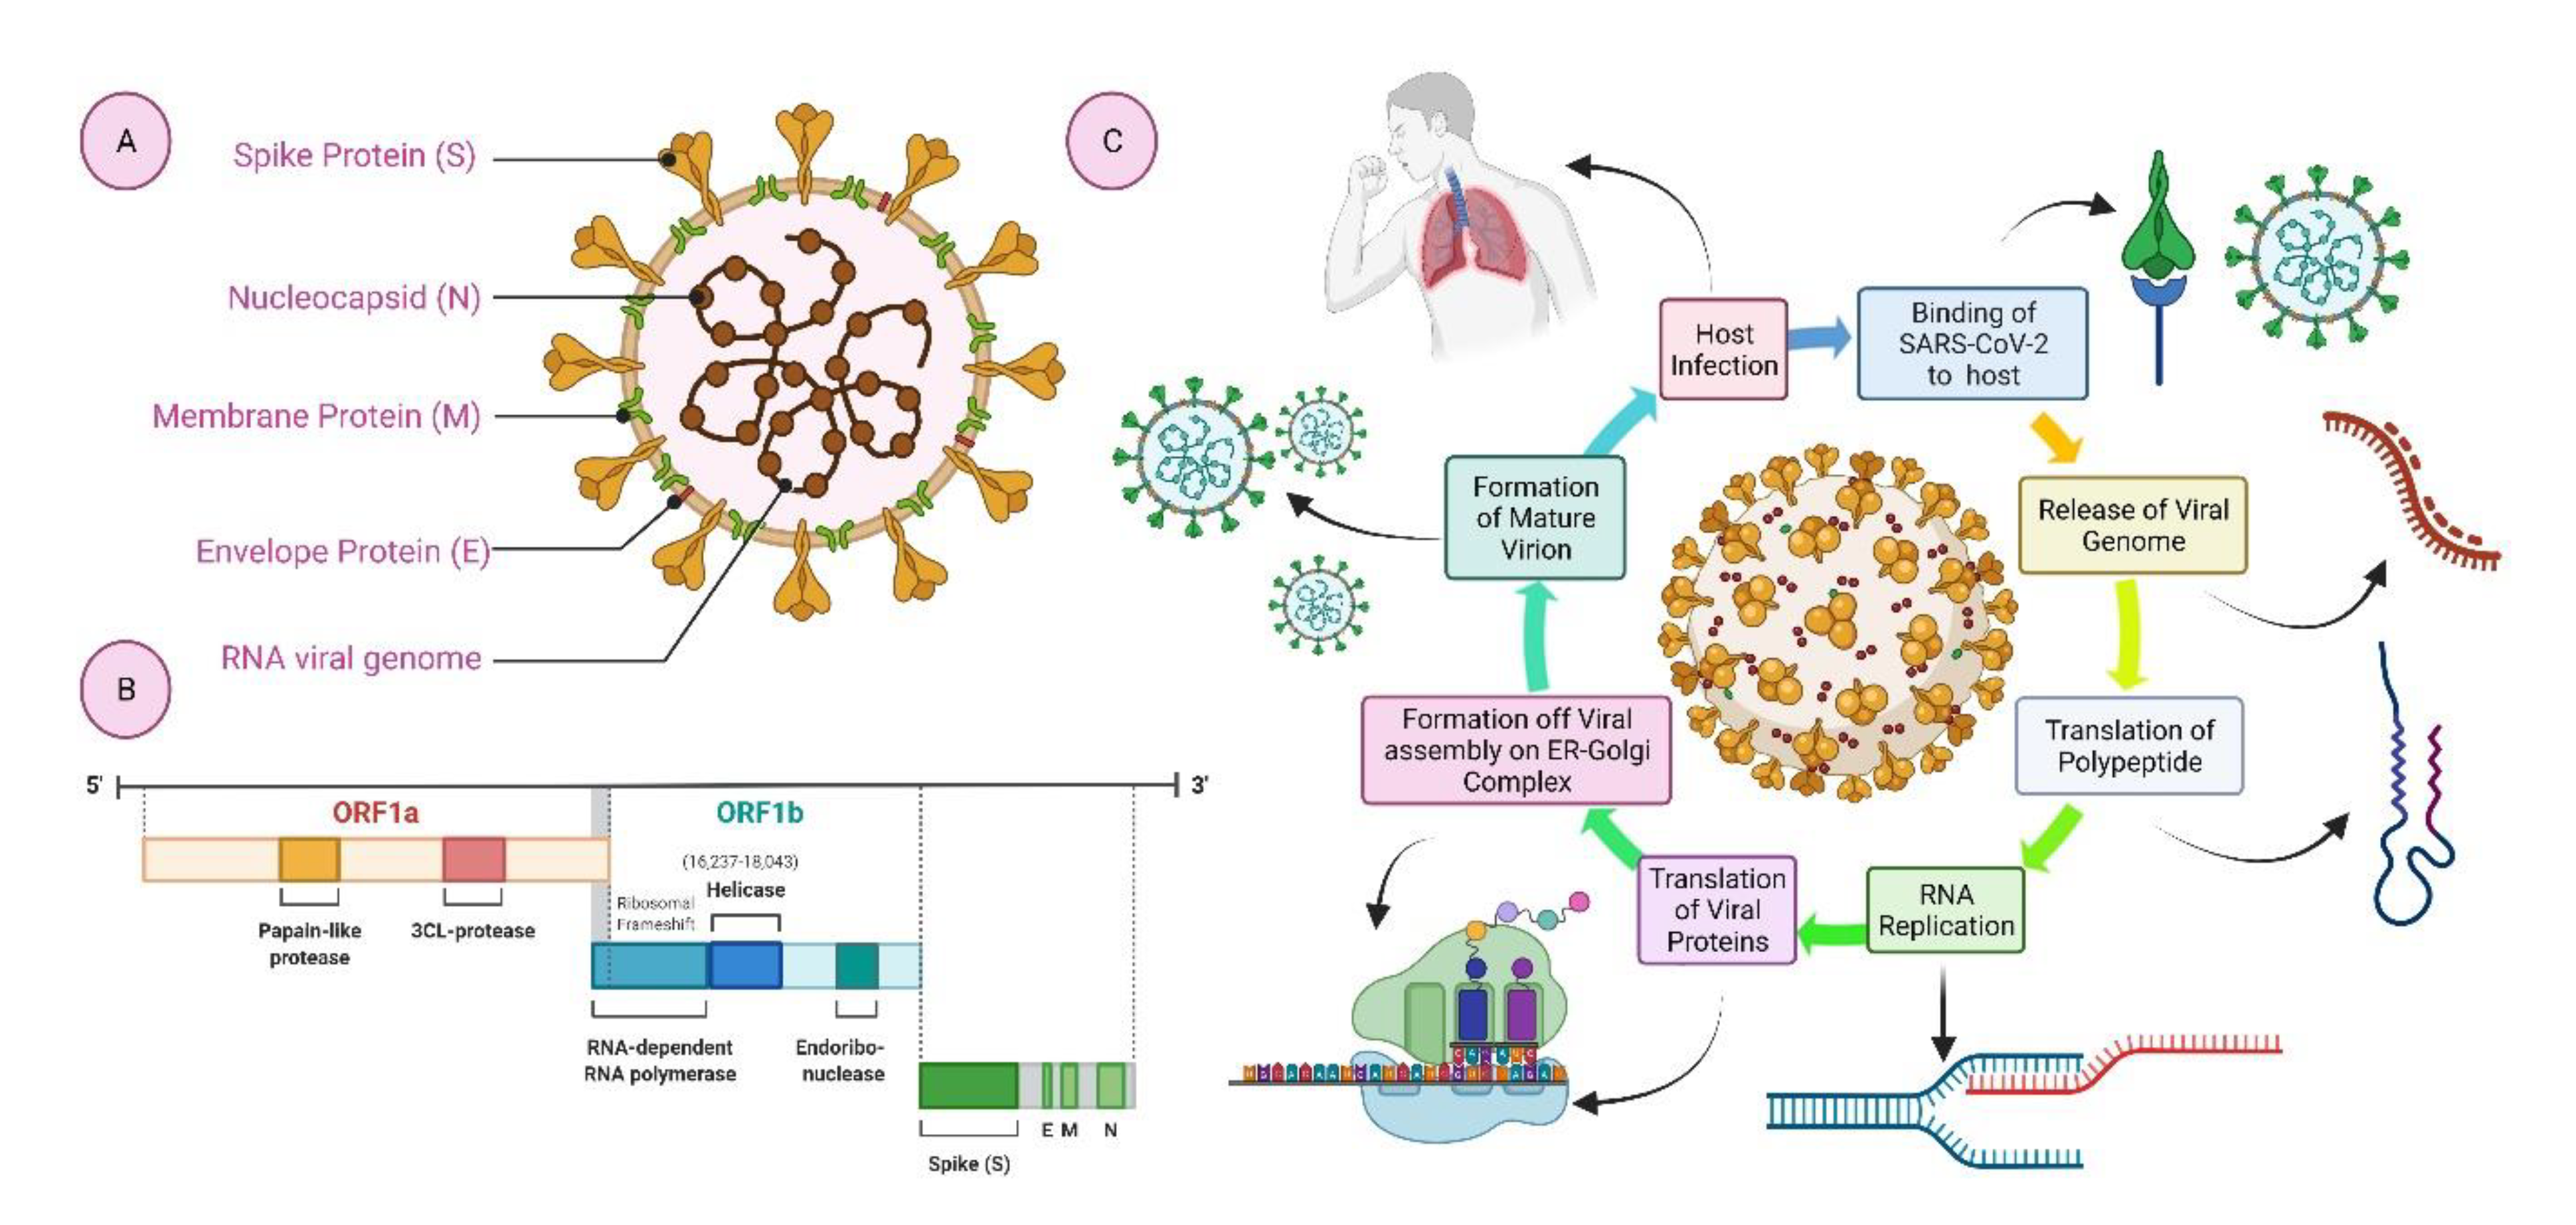 Biologics | Free Full-Text | Nucleic Acid Vaccines for COVID-19: A Shift in the Vaccine Development Arena